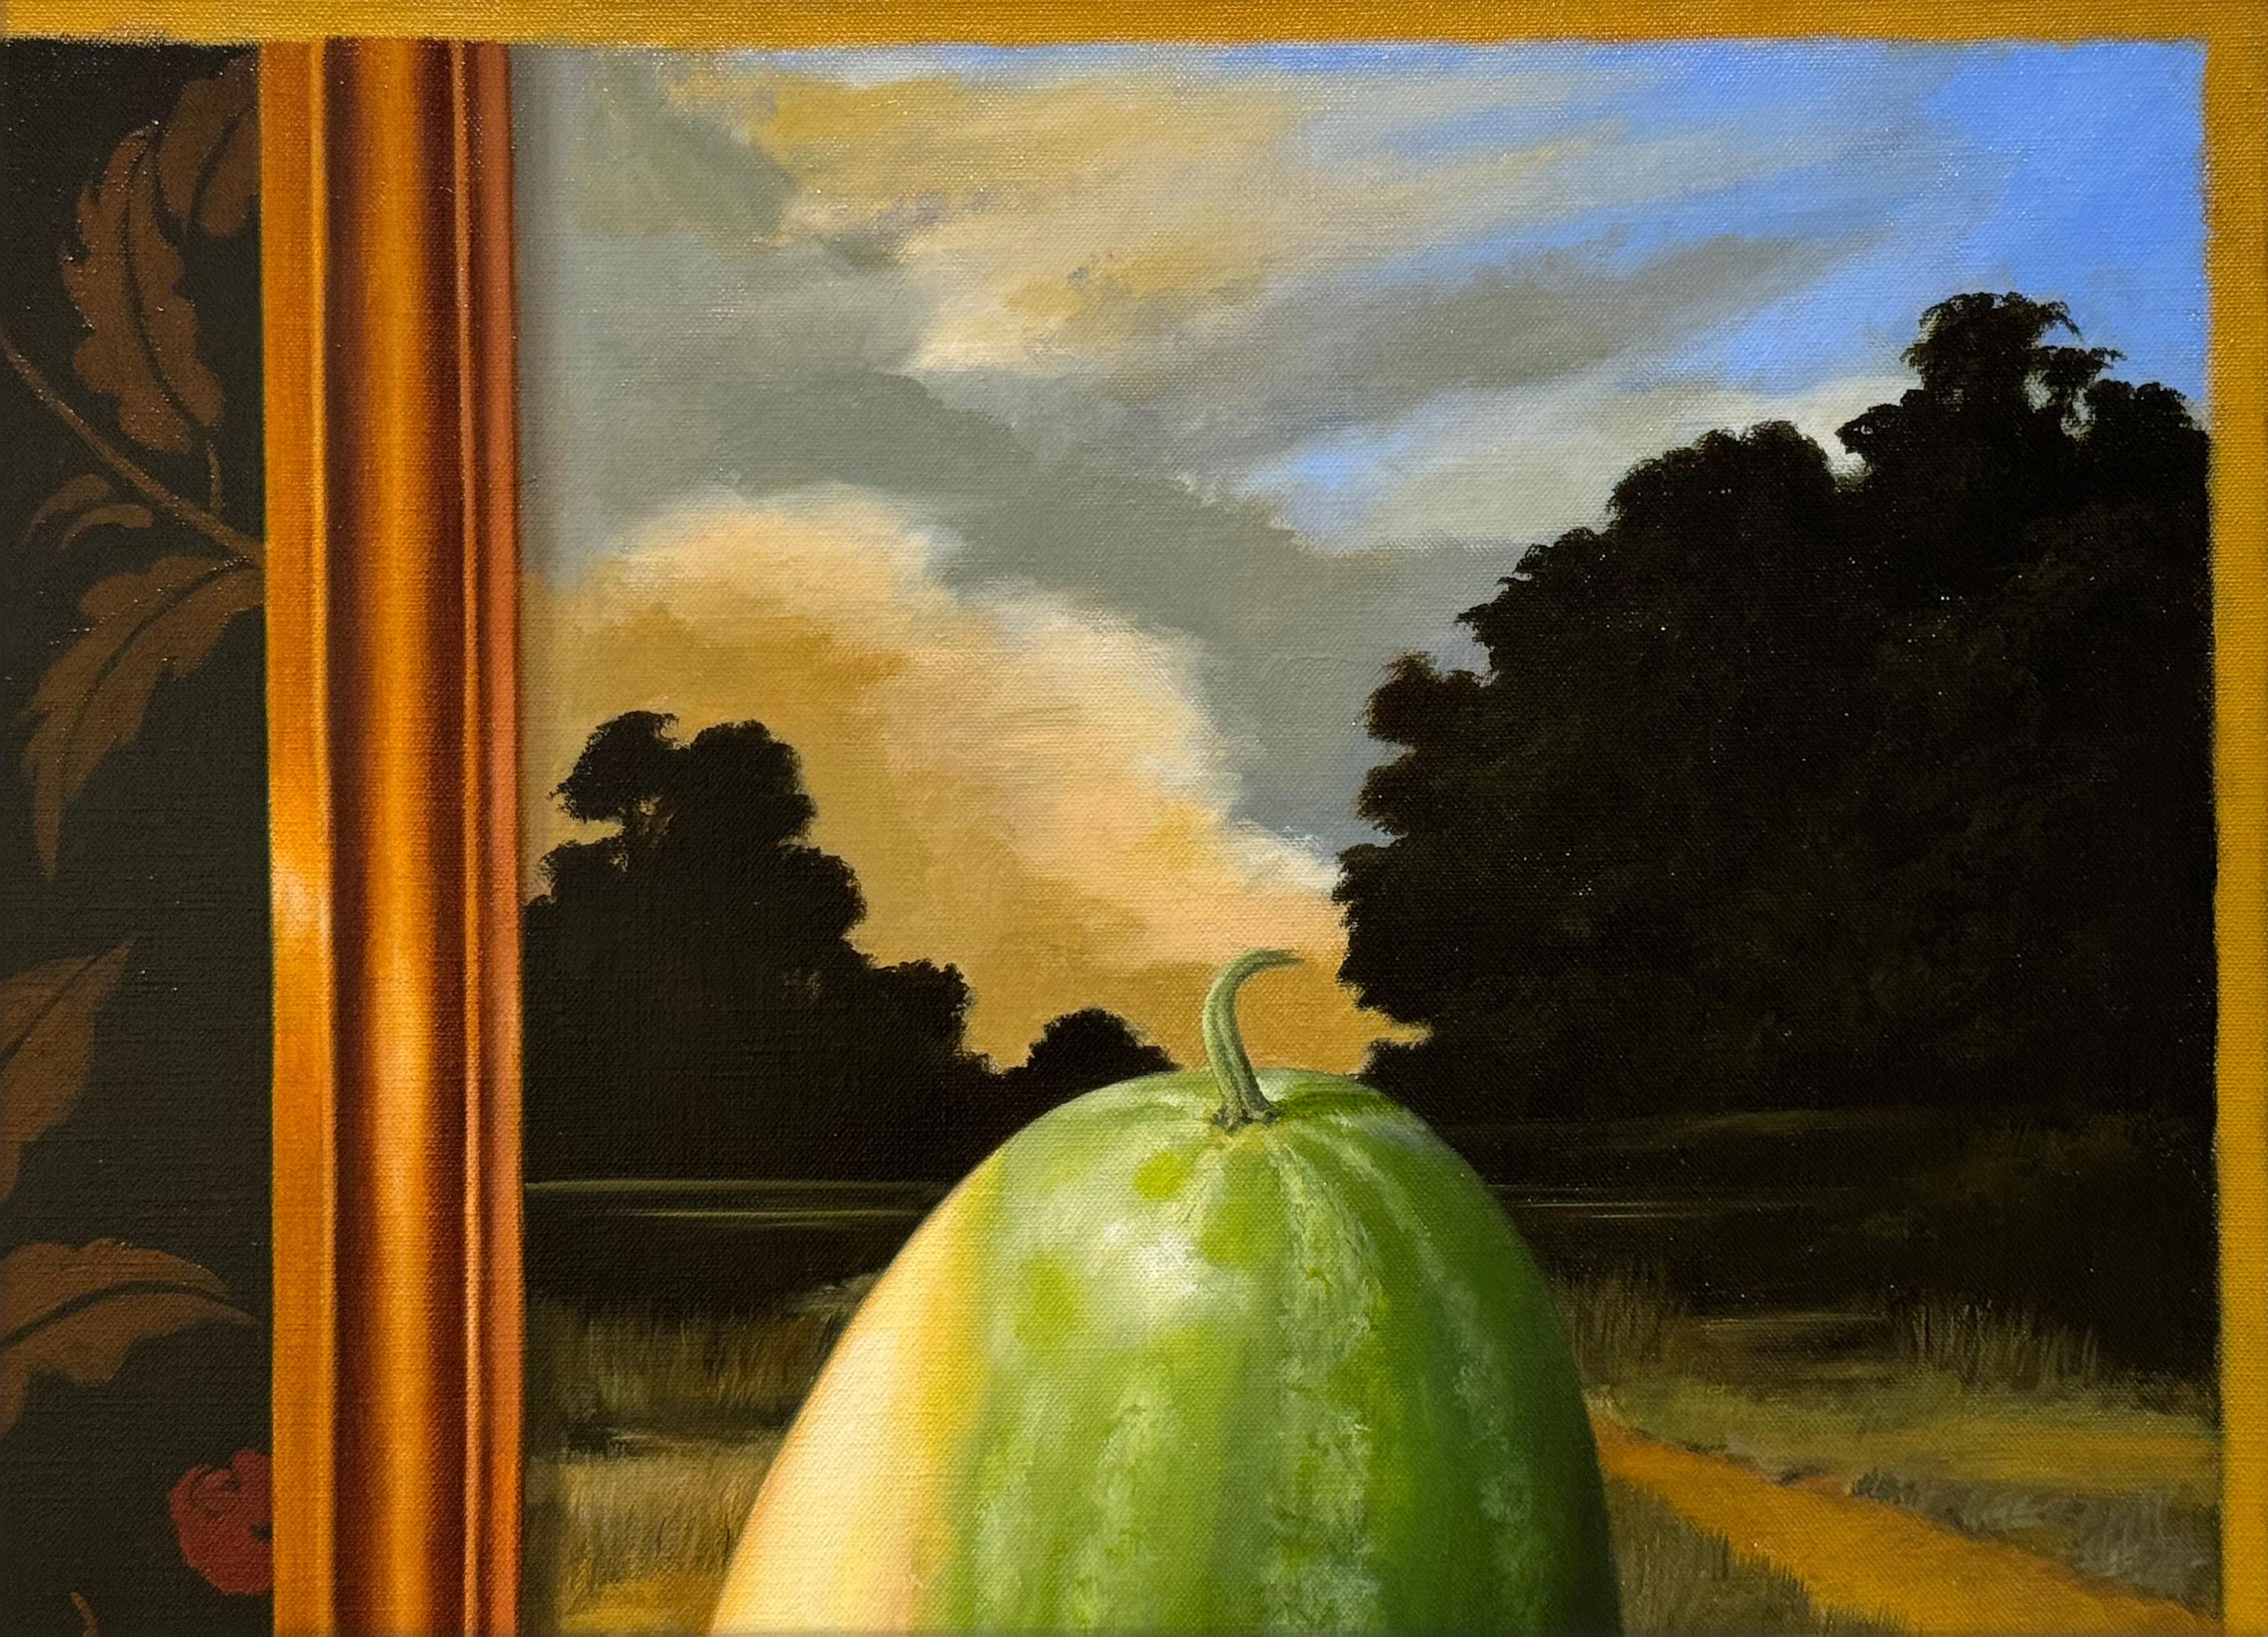 IMPROBABLE BALANCE: WATERMELON - Still Life / Trompe L'œil / Fruit - Contemporary Painting by Edward Butler